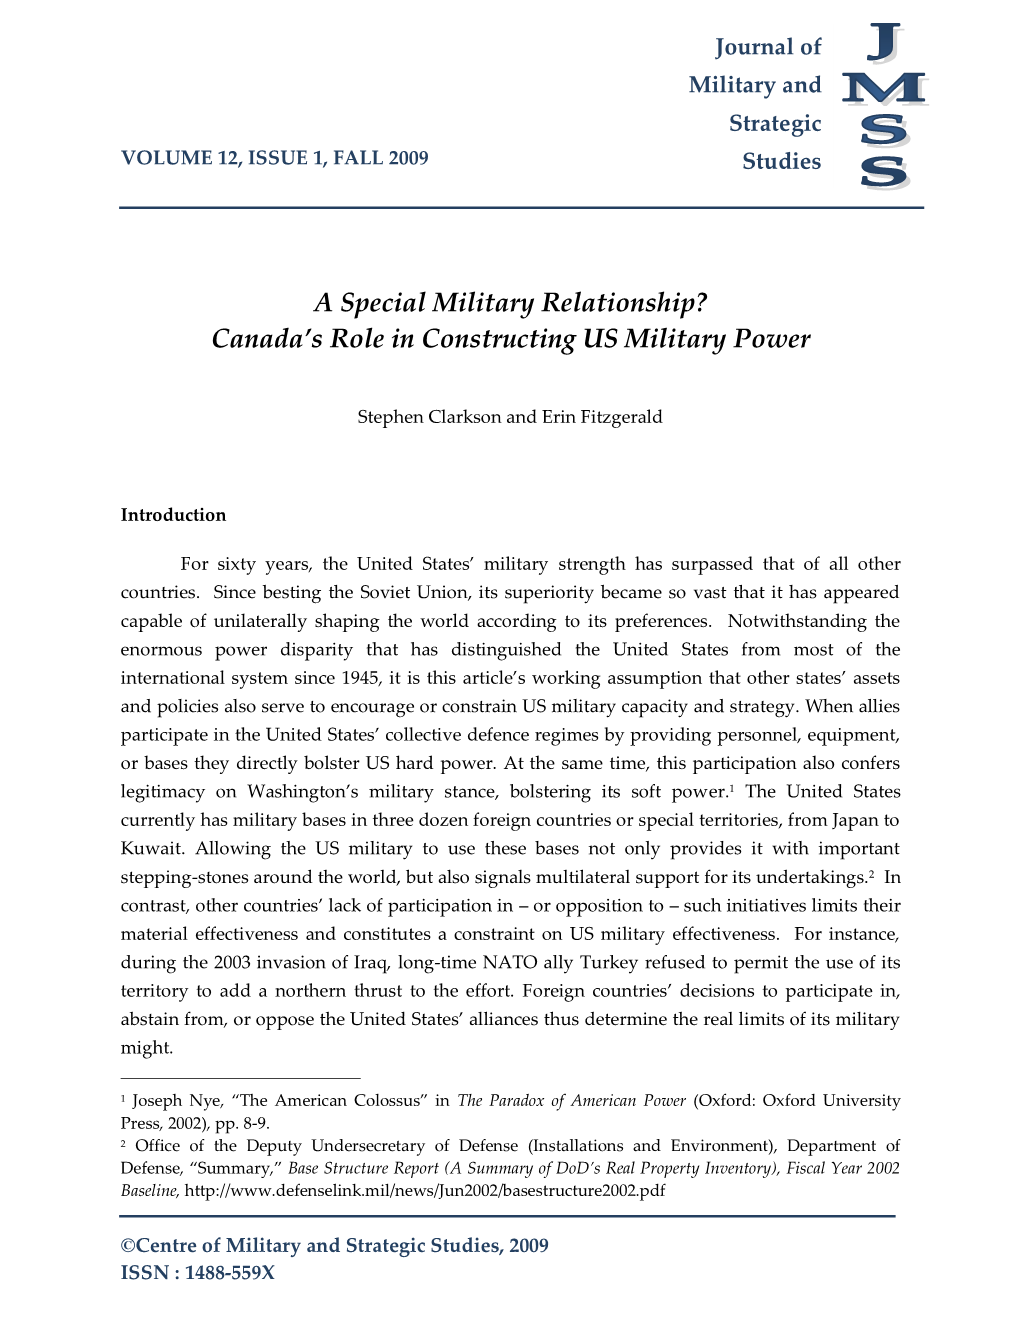 A Special Military Relationship? Canada's Role in Constructing US Military Power